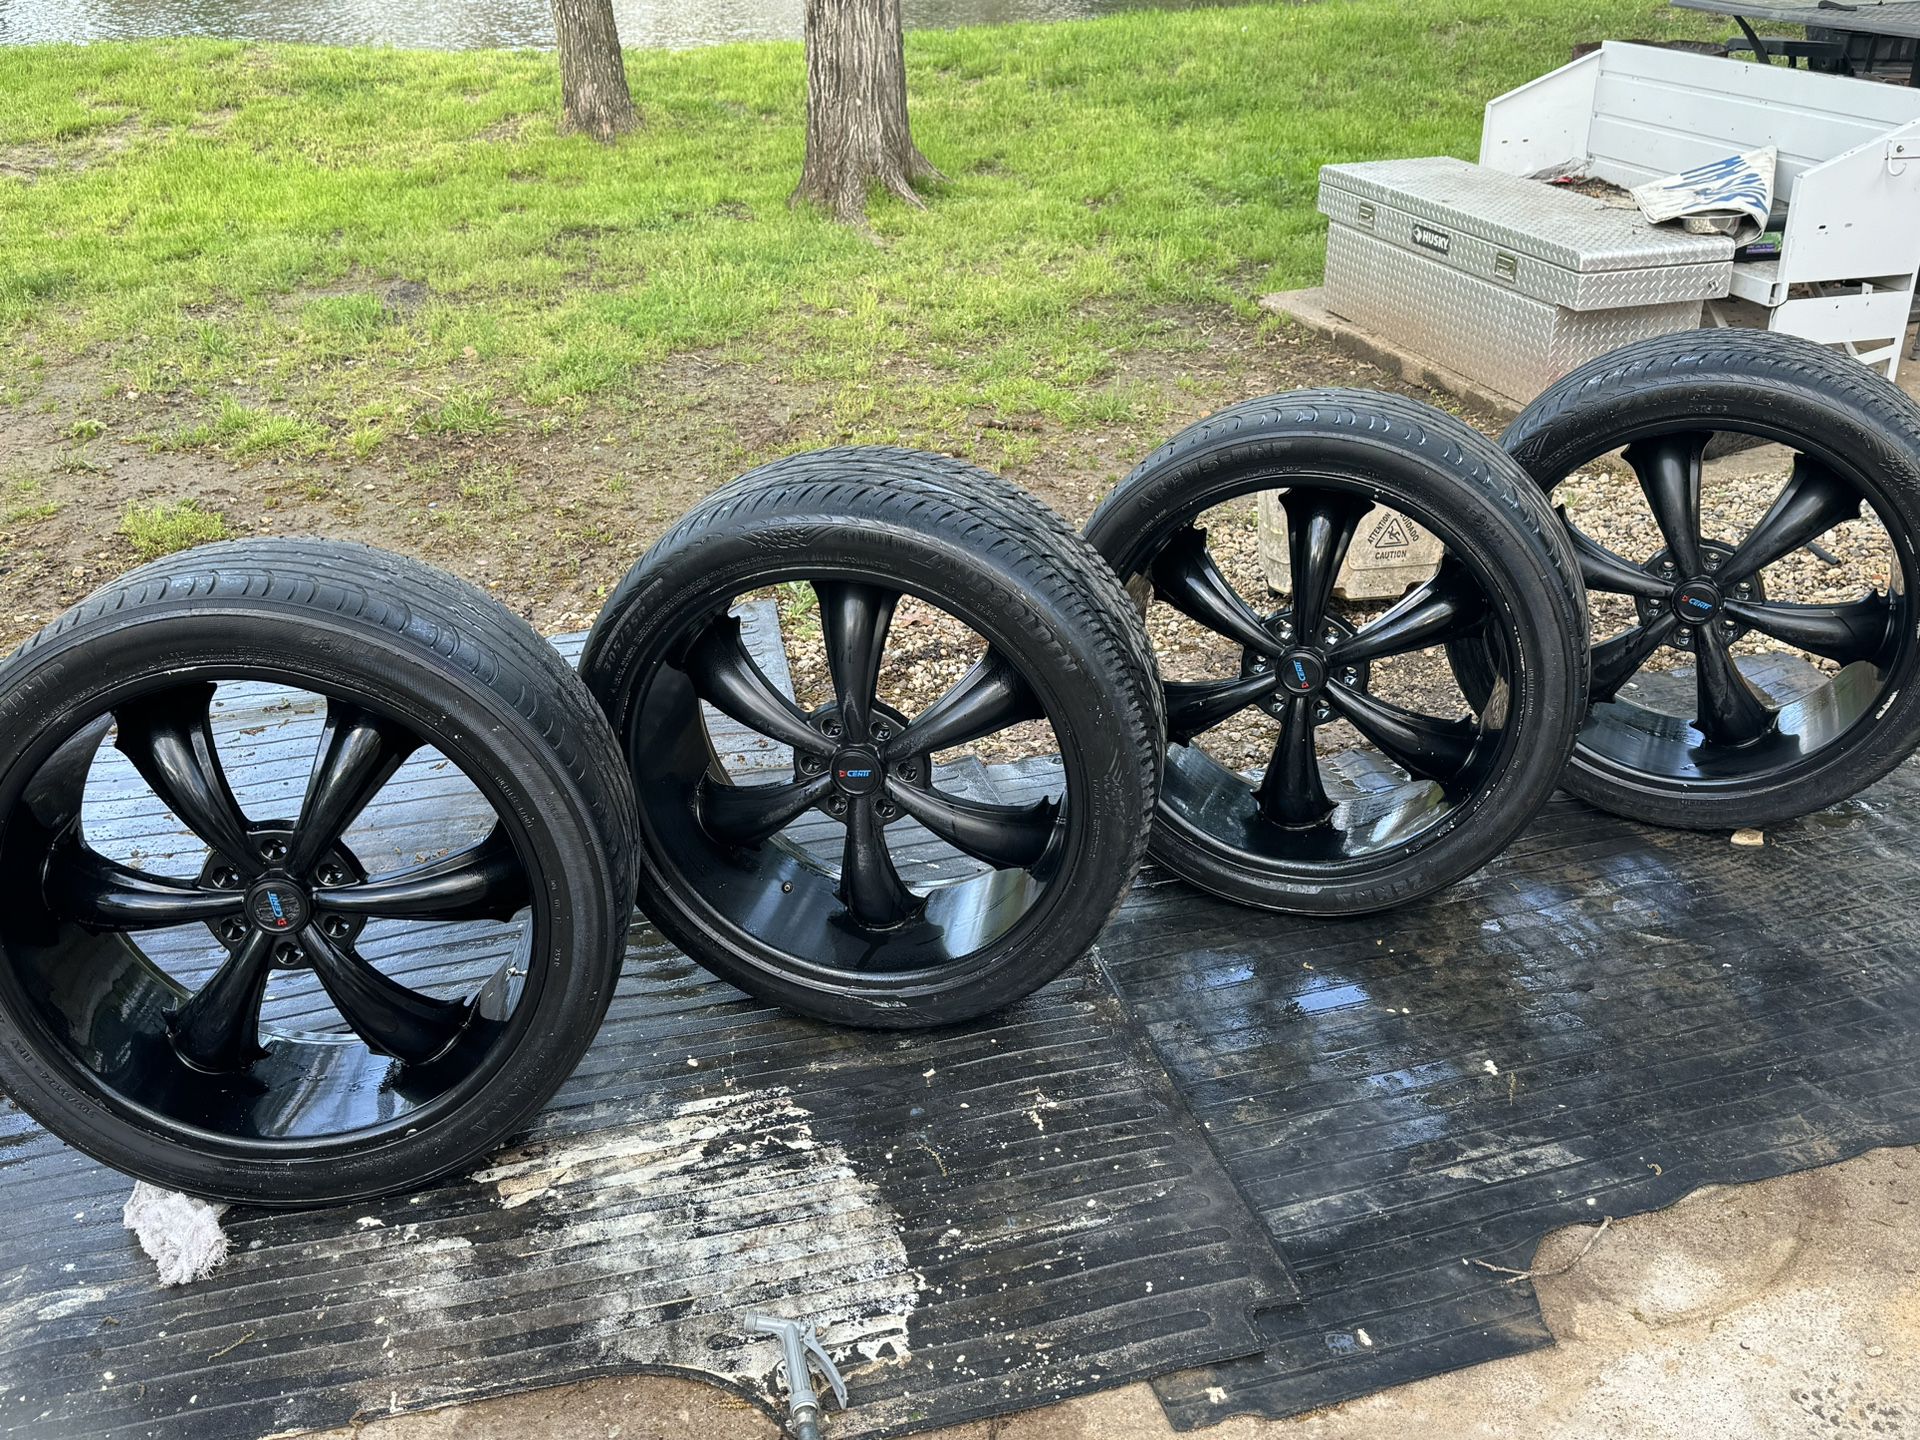 D Centi Rims With Tires